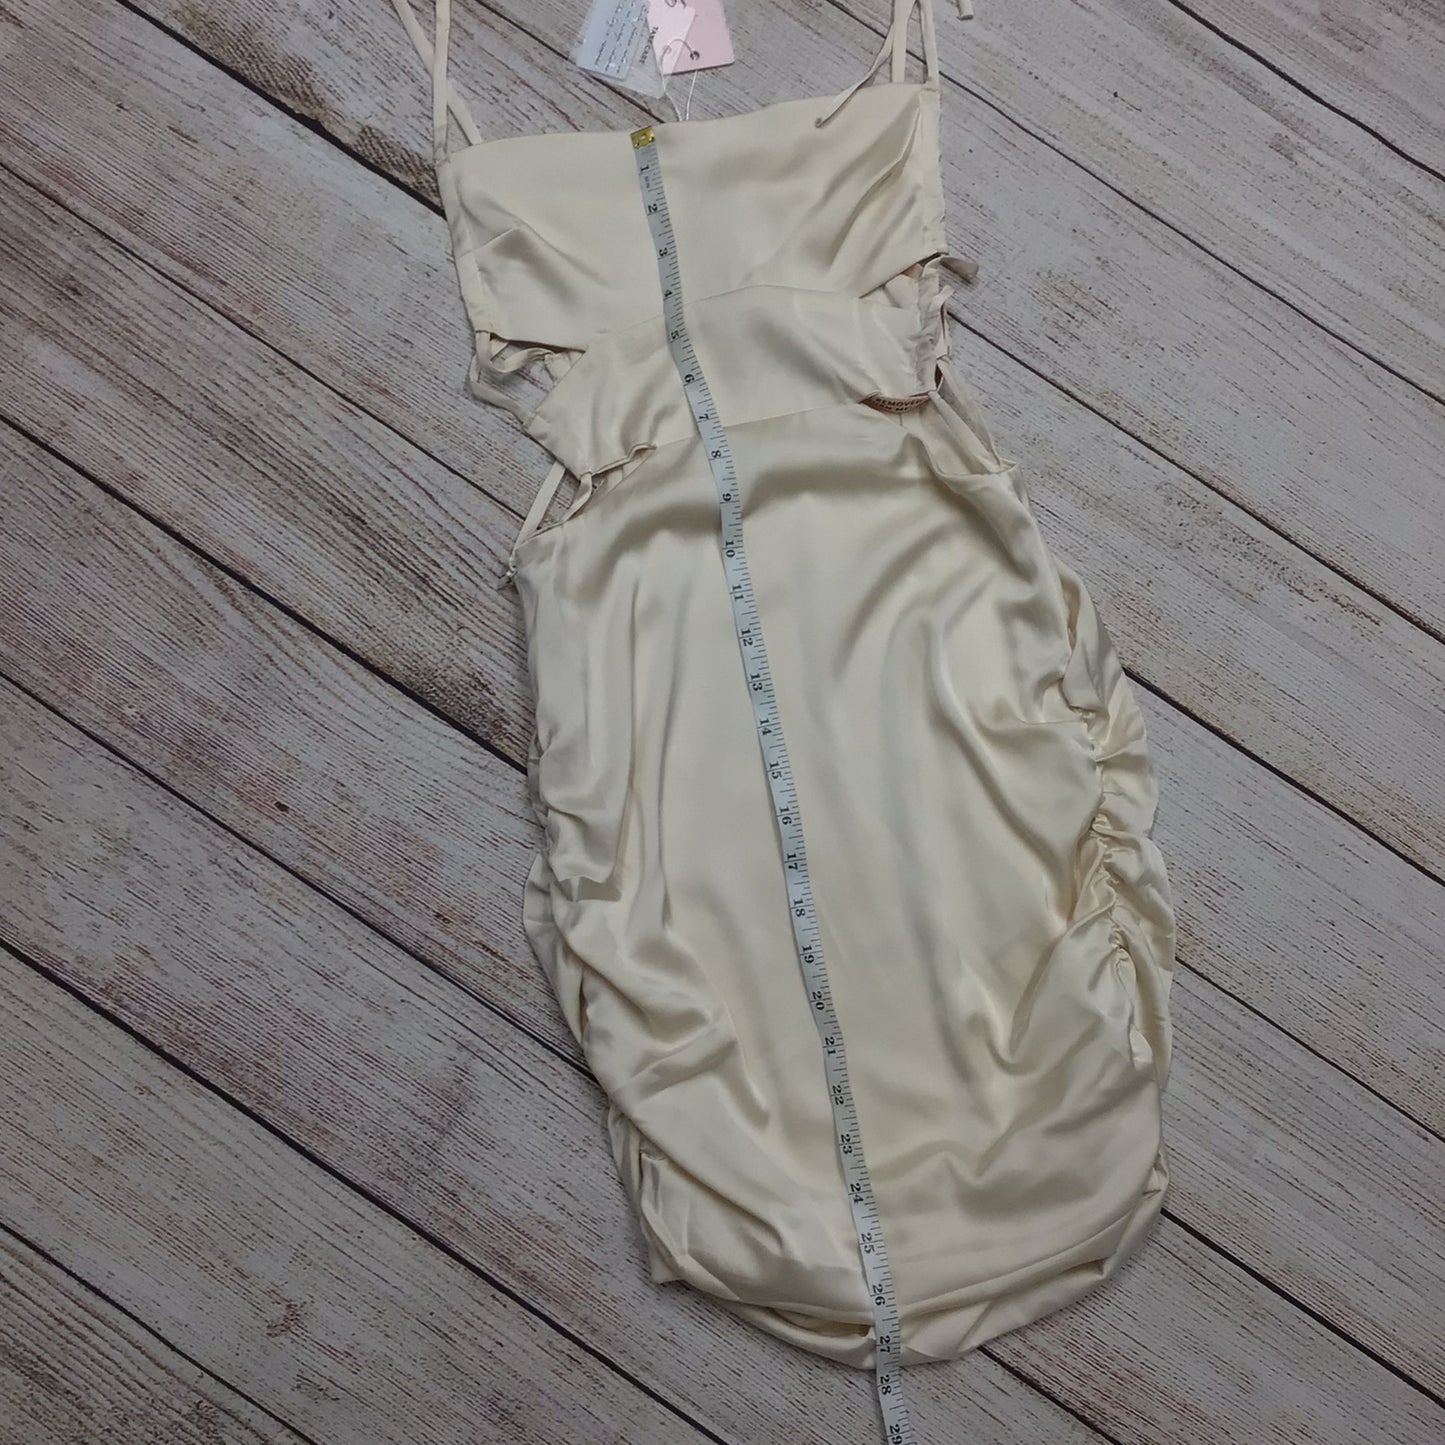 BNWT Oh Polly Ivory Ruched Dress w/Tie Straps & Cut Out Size 8